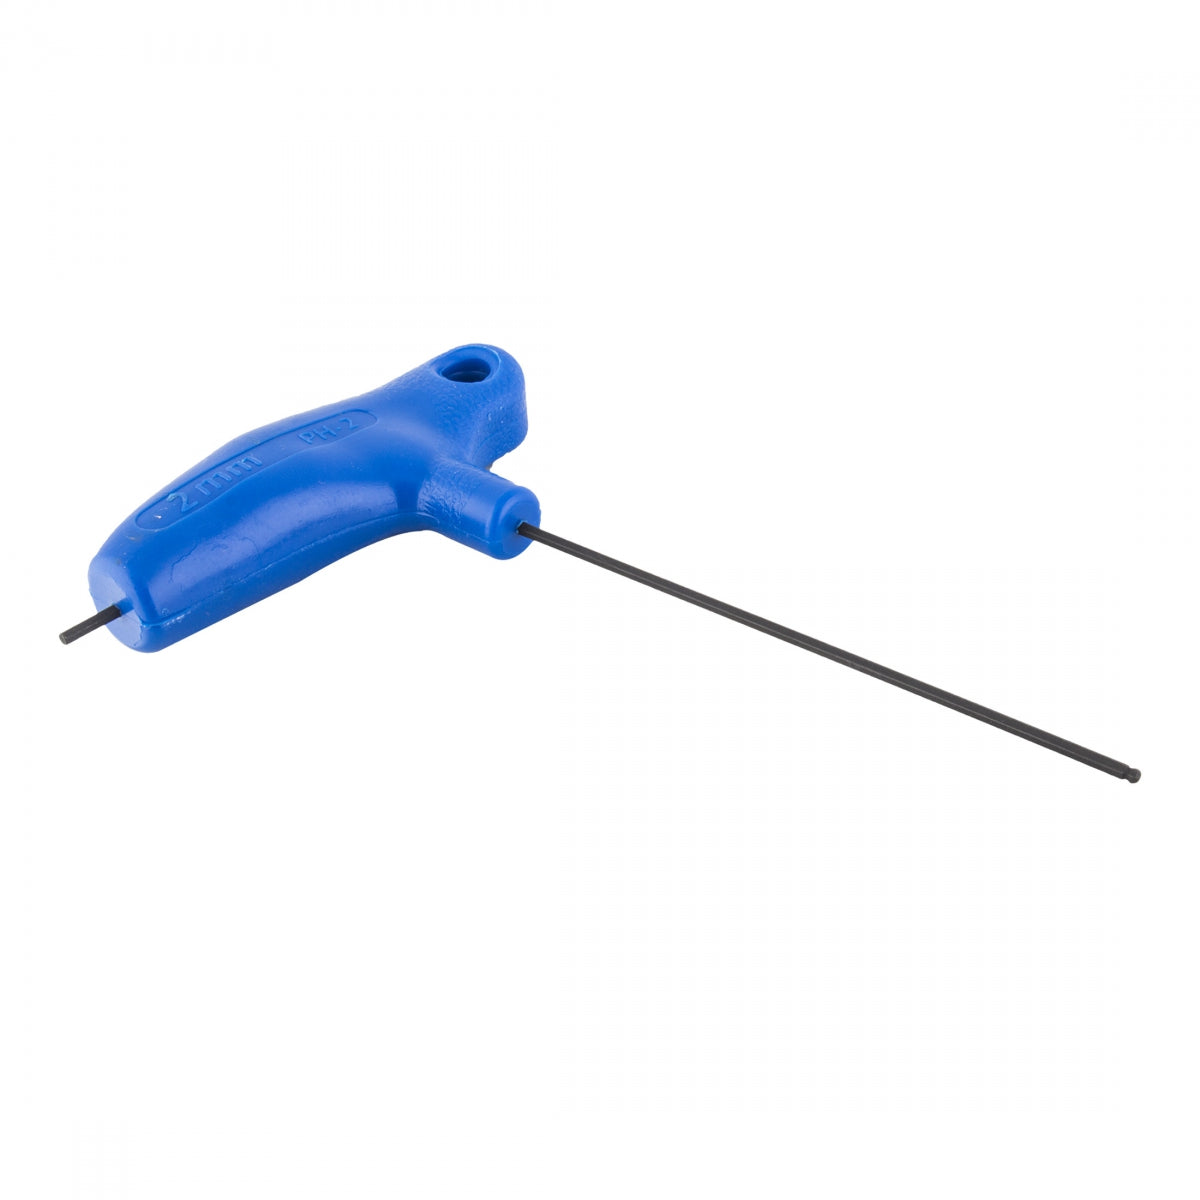 Park Tool #PH-2 P-Handle Hex Wrench, 2mm